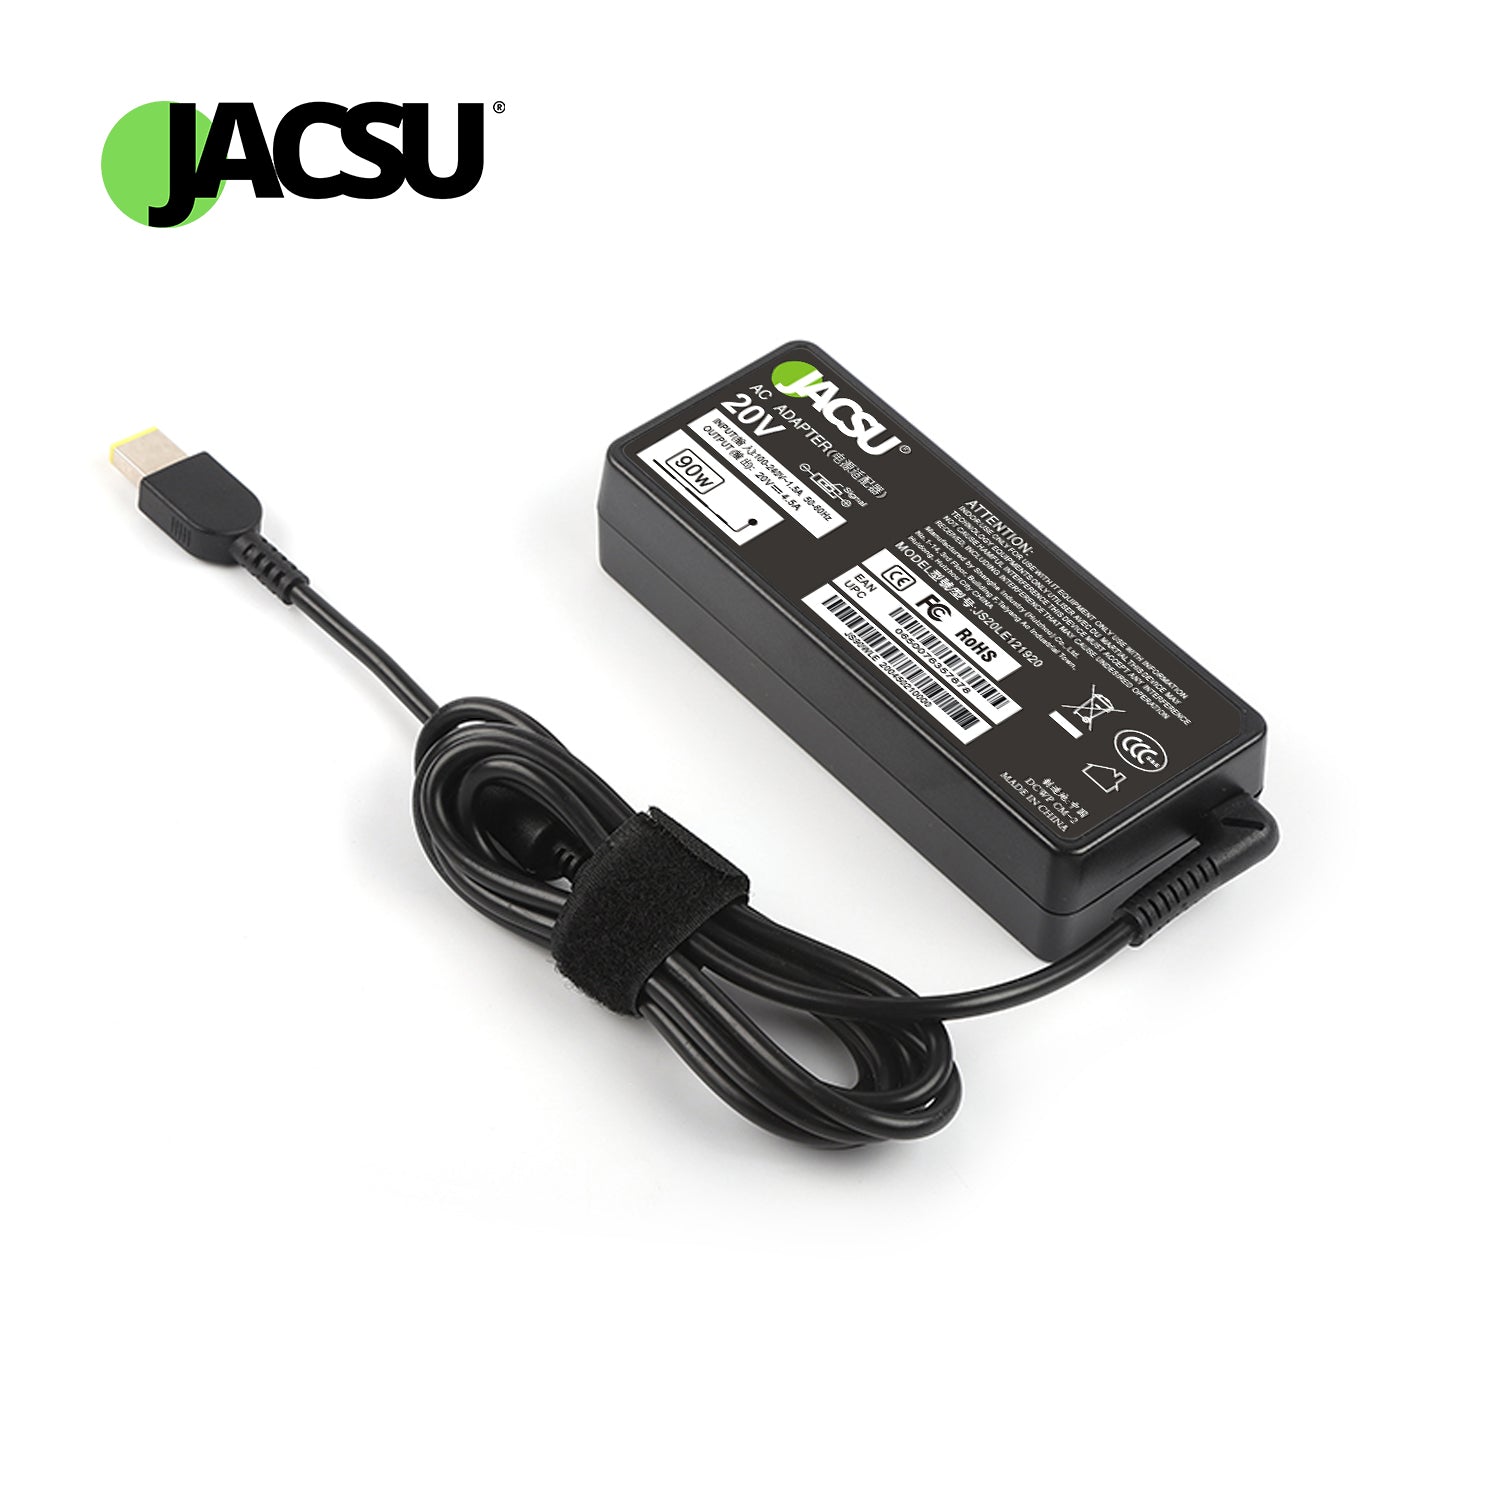 Jacsu 90W 20V 4.5A USB PIN AC Adapter Laptop Charger For G405s G500 G505 G510 Thinkpad E540 ADLX90NCC3A ADL